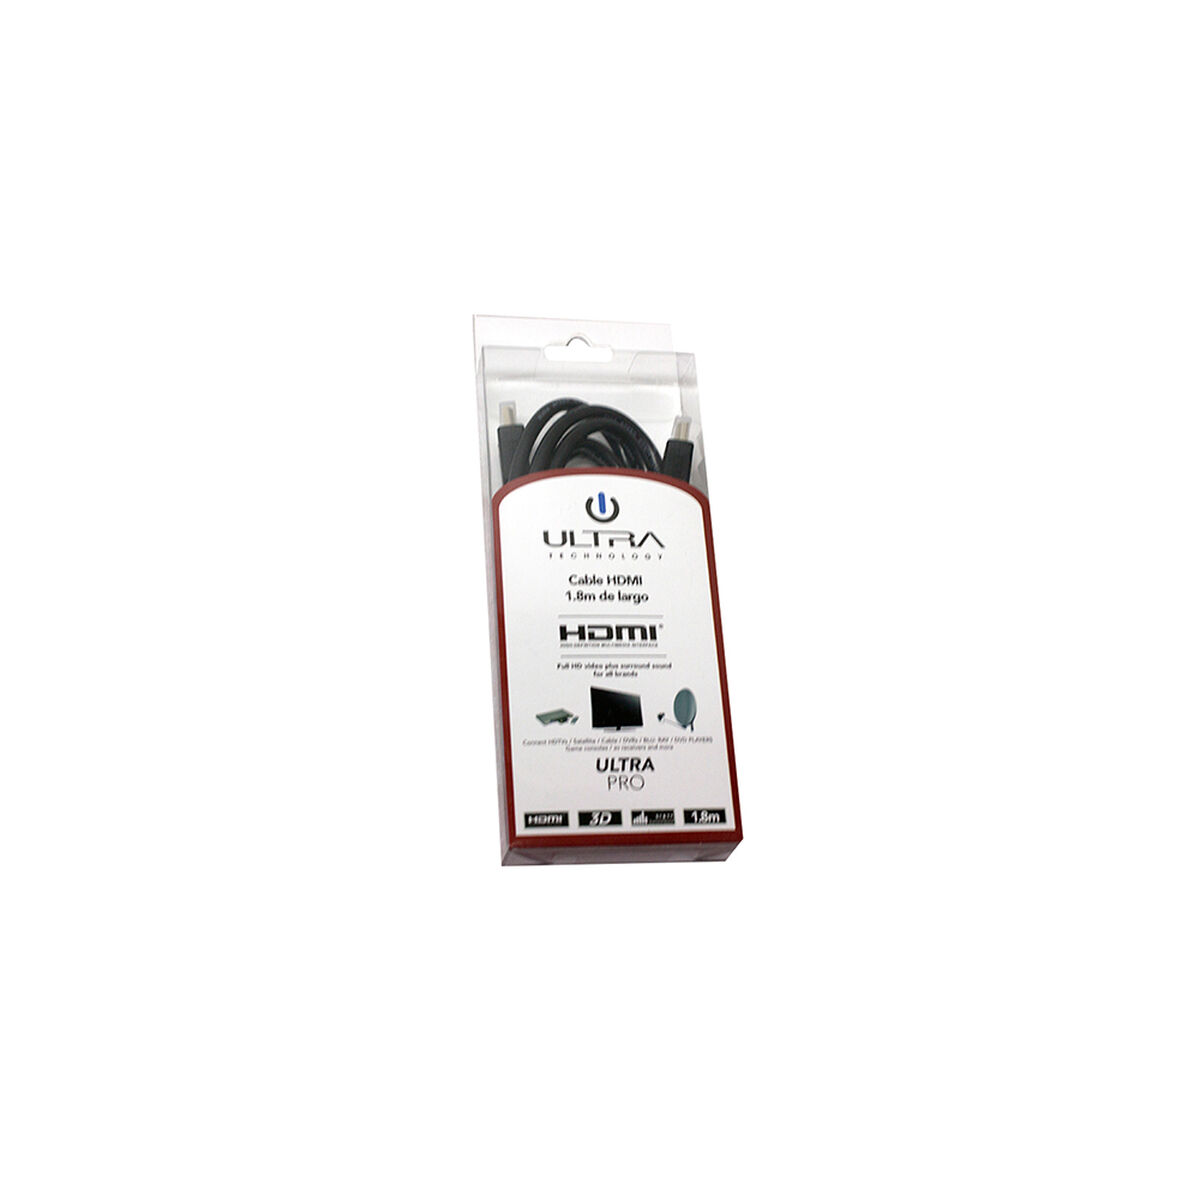 Cable HDMI Ultra 31HDMBL187 Blister 1,8 mts.